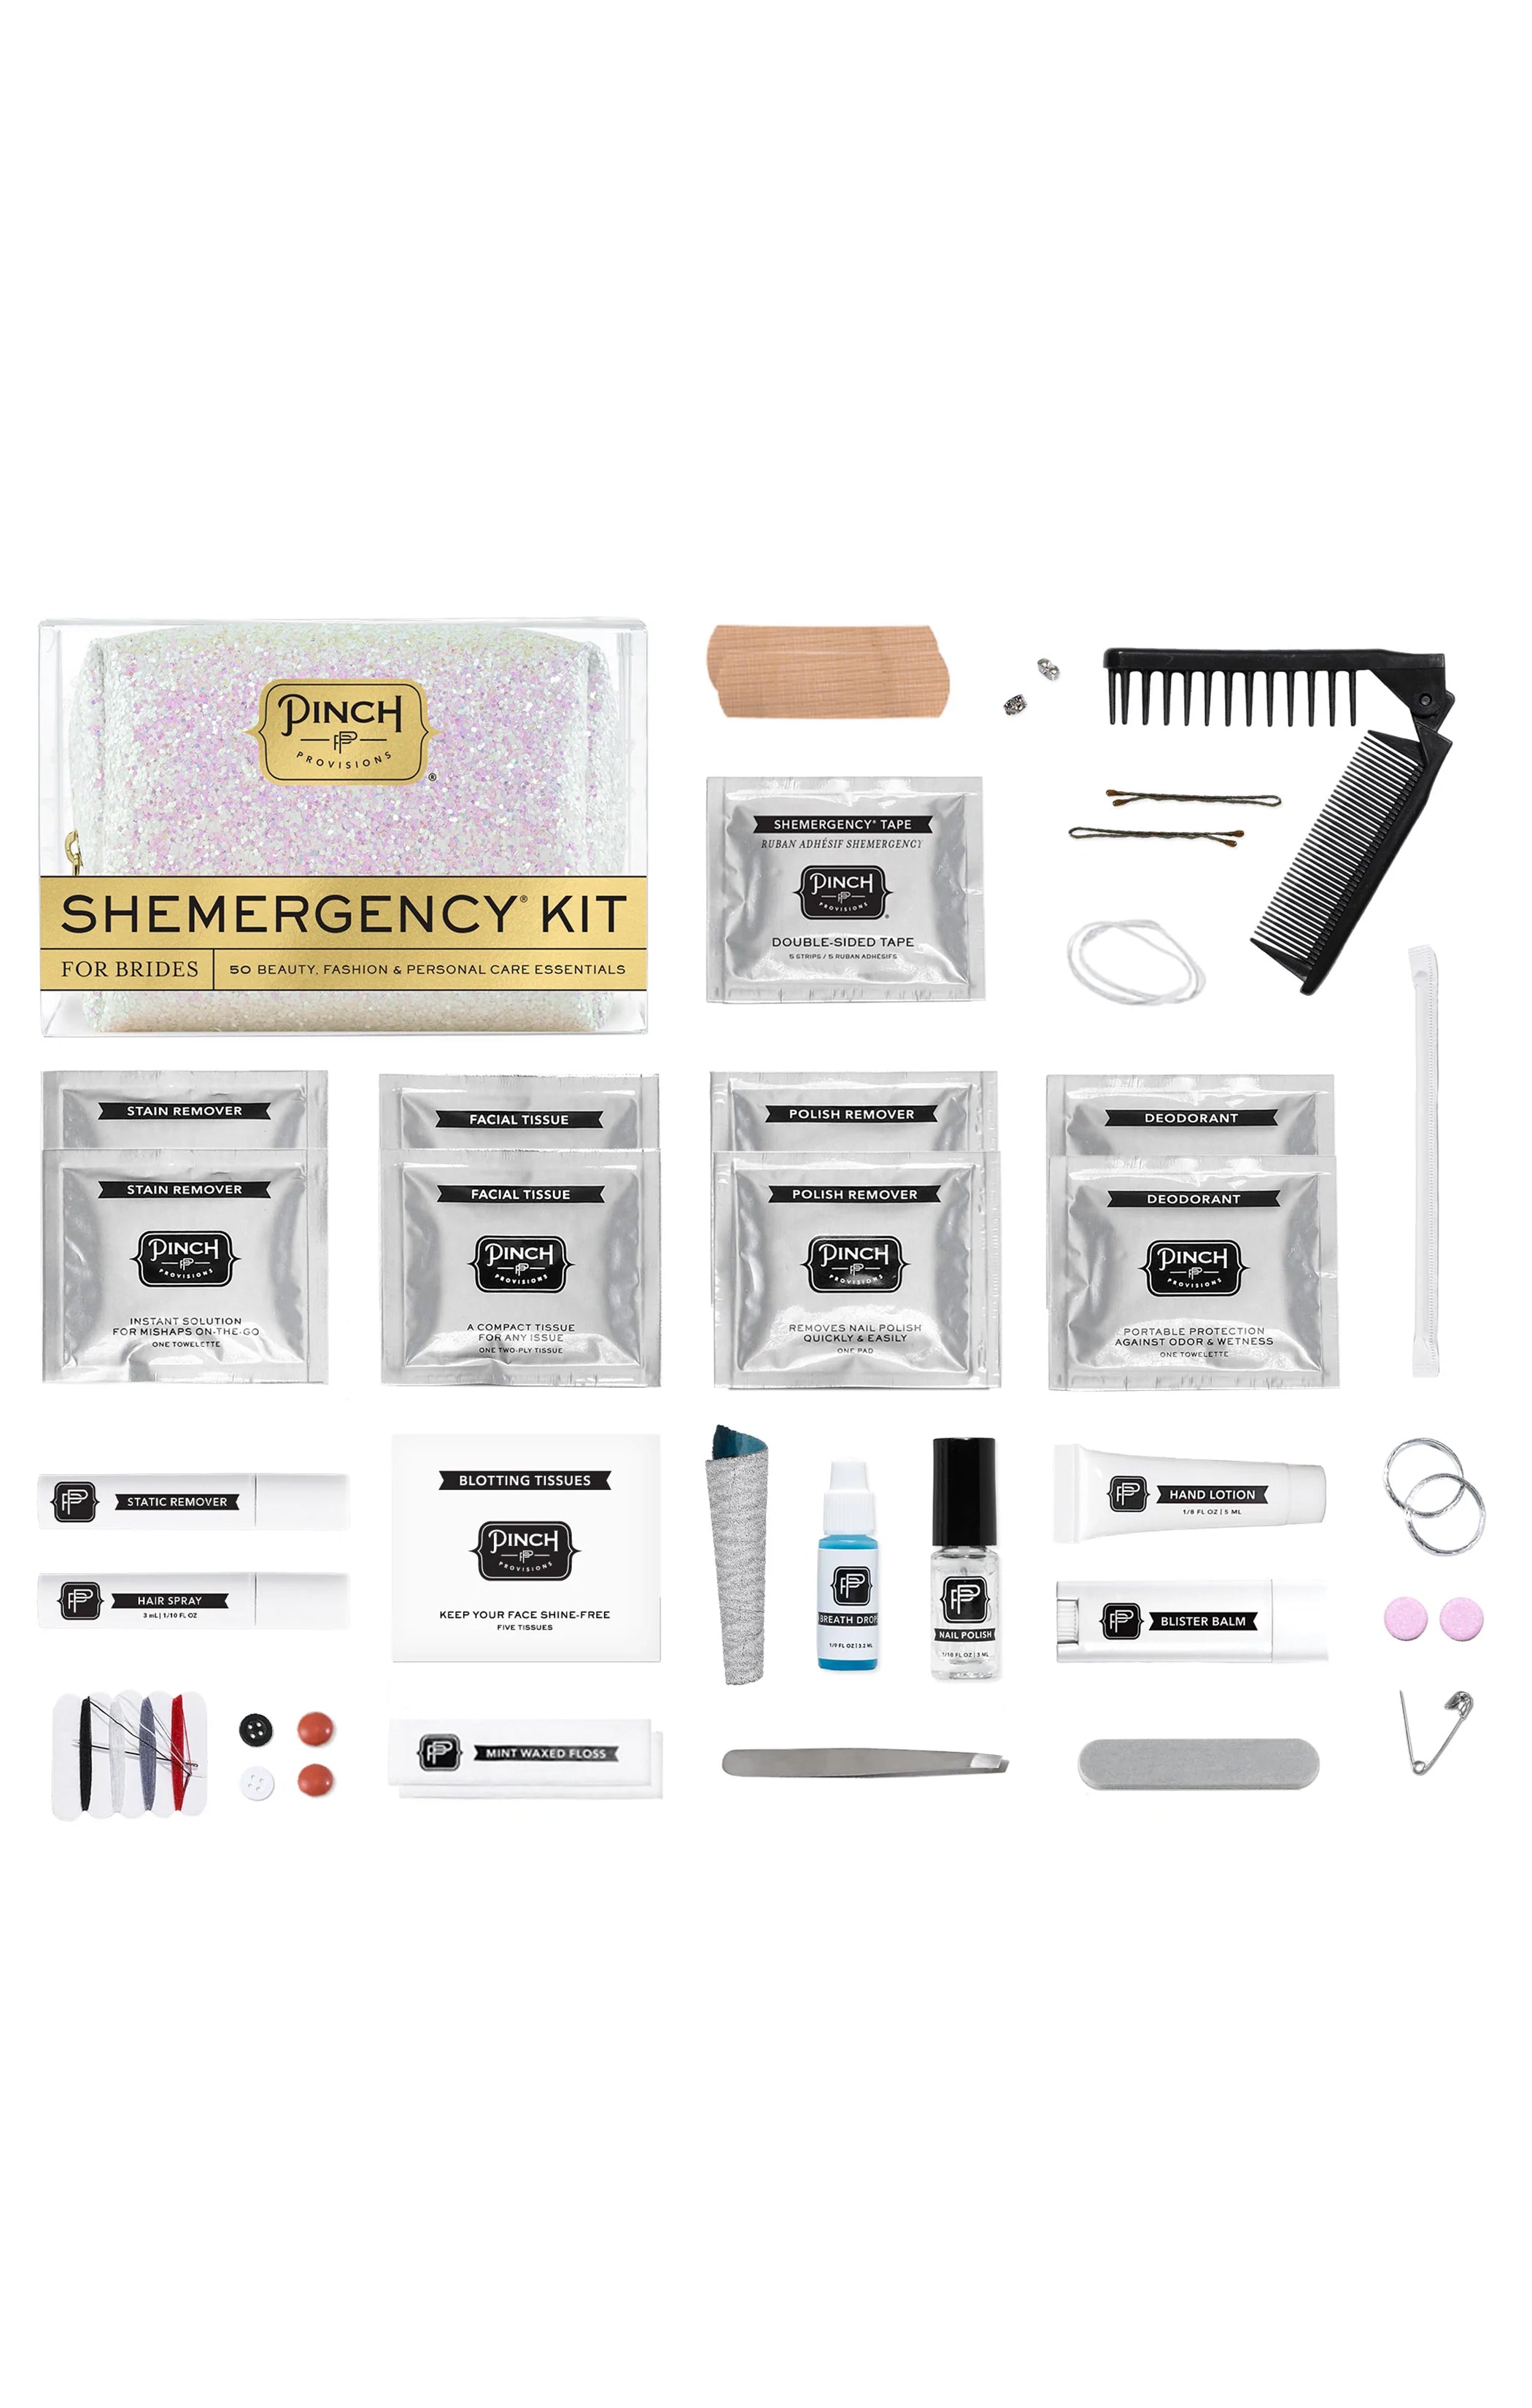 TWD  The White Dress By The Shore - Mini Emergency Kit for brides